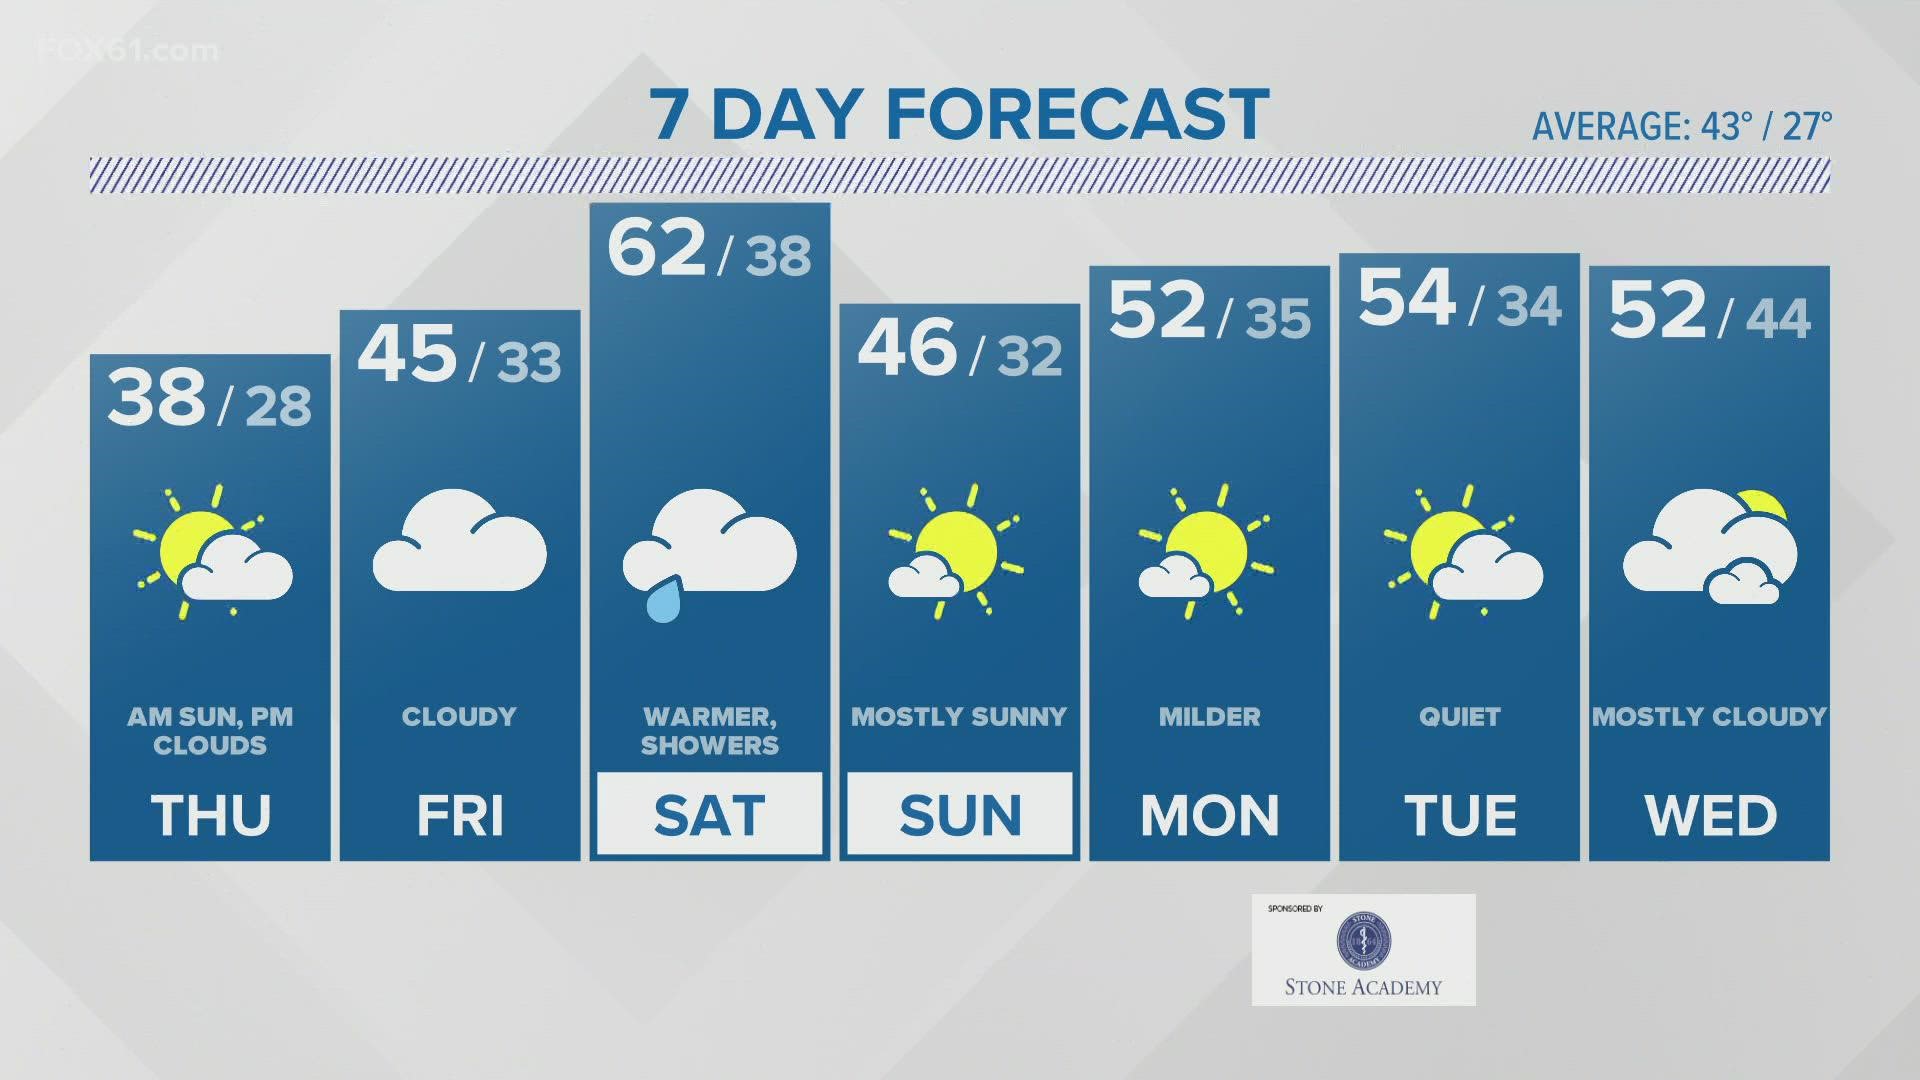 Warmer air returns for the weekend, with showery weather coming in for Saturday.